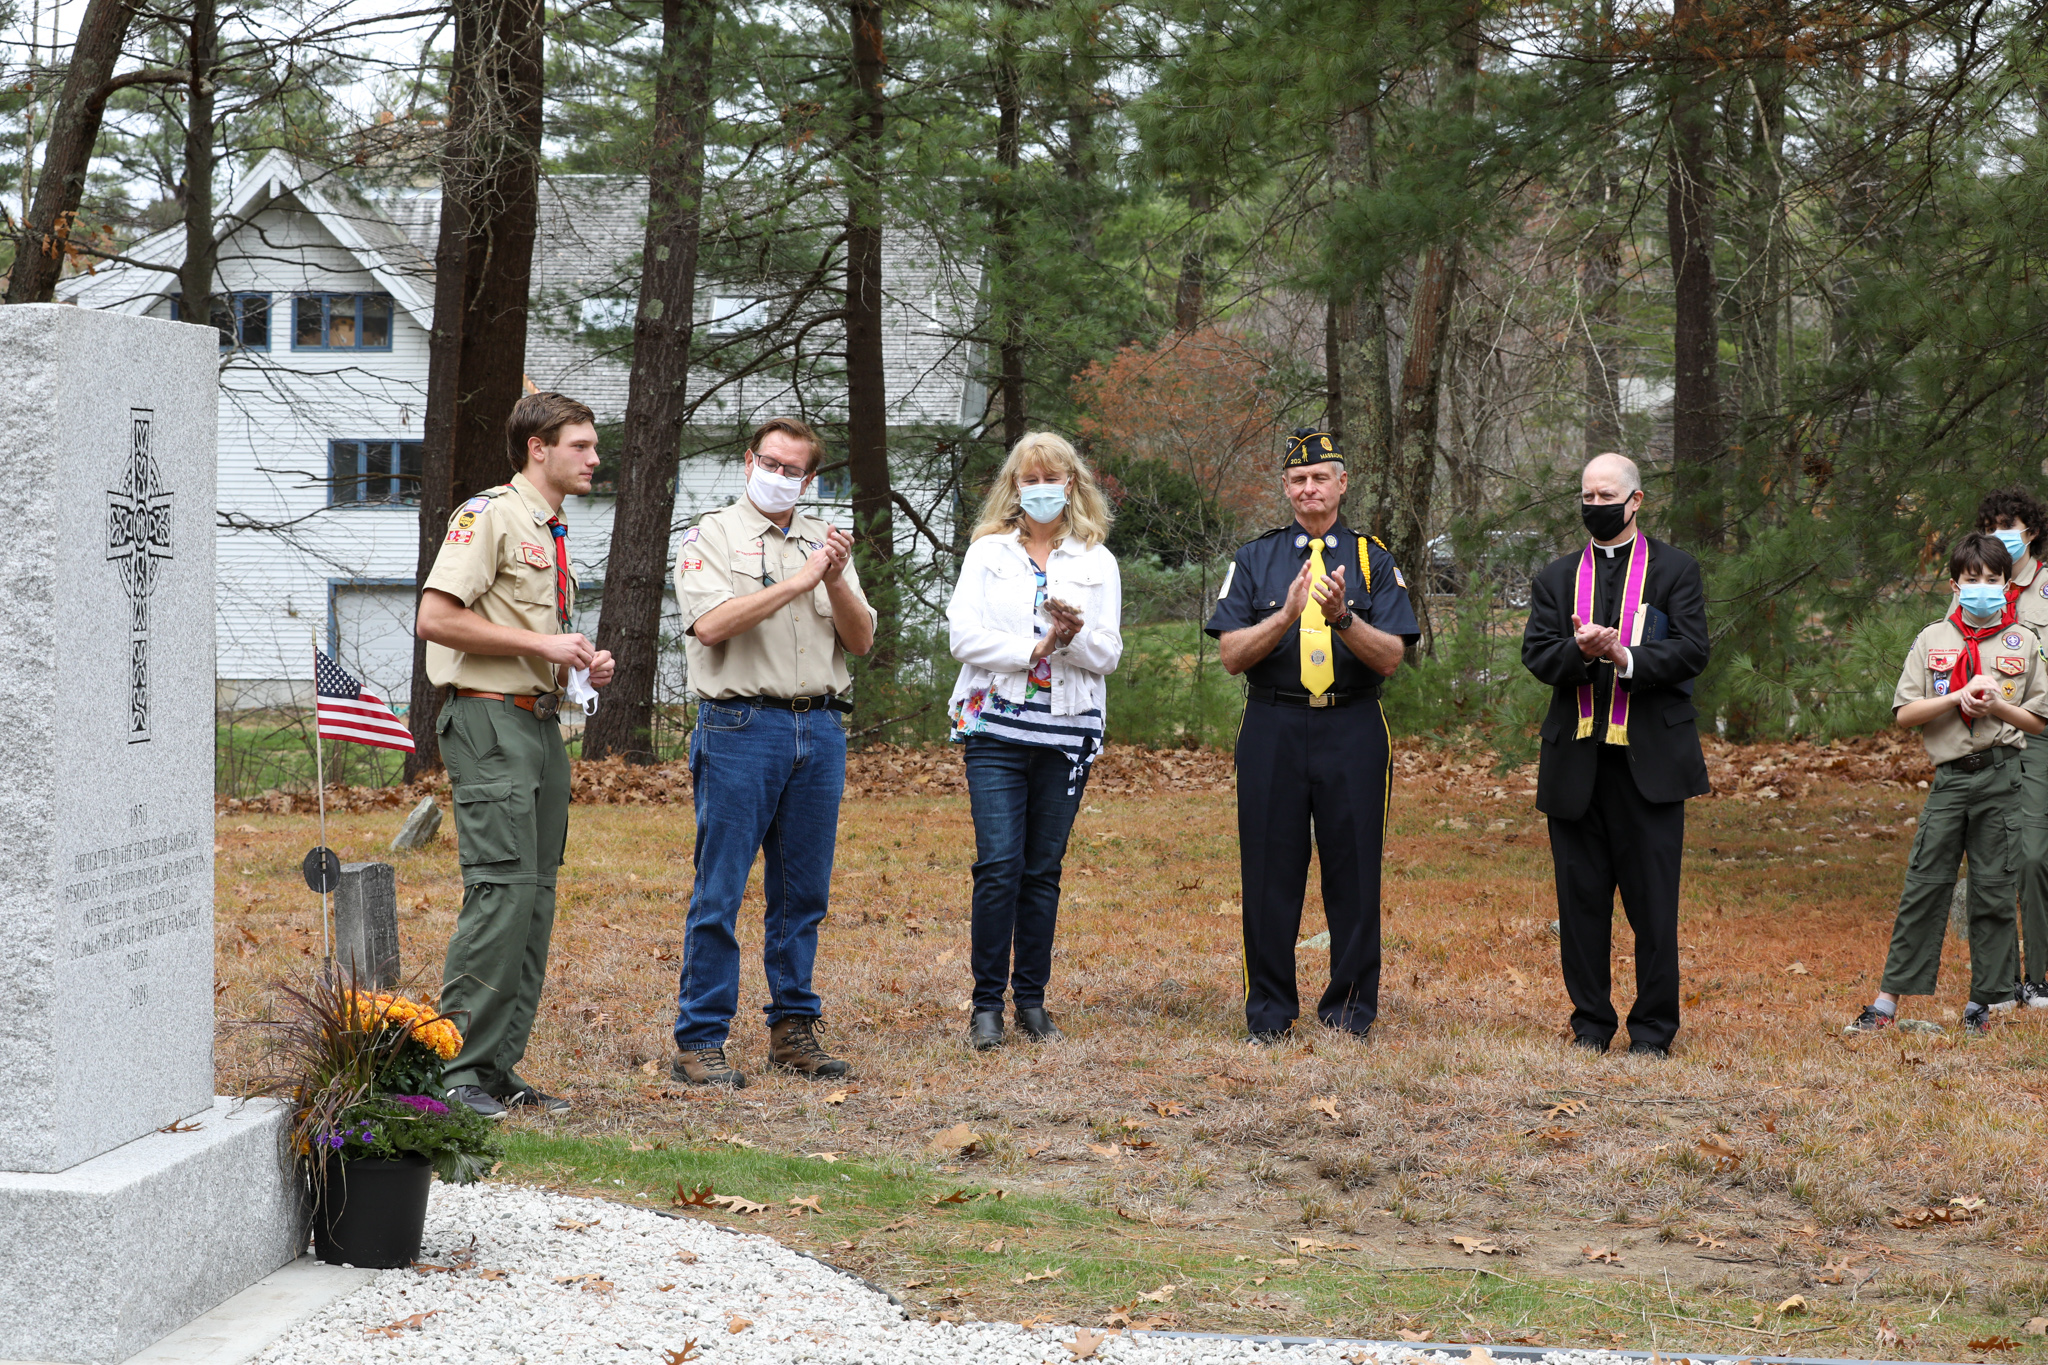 Independent Thoughts: Eagle Scout project a trip through history